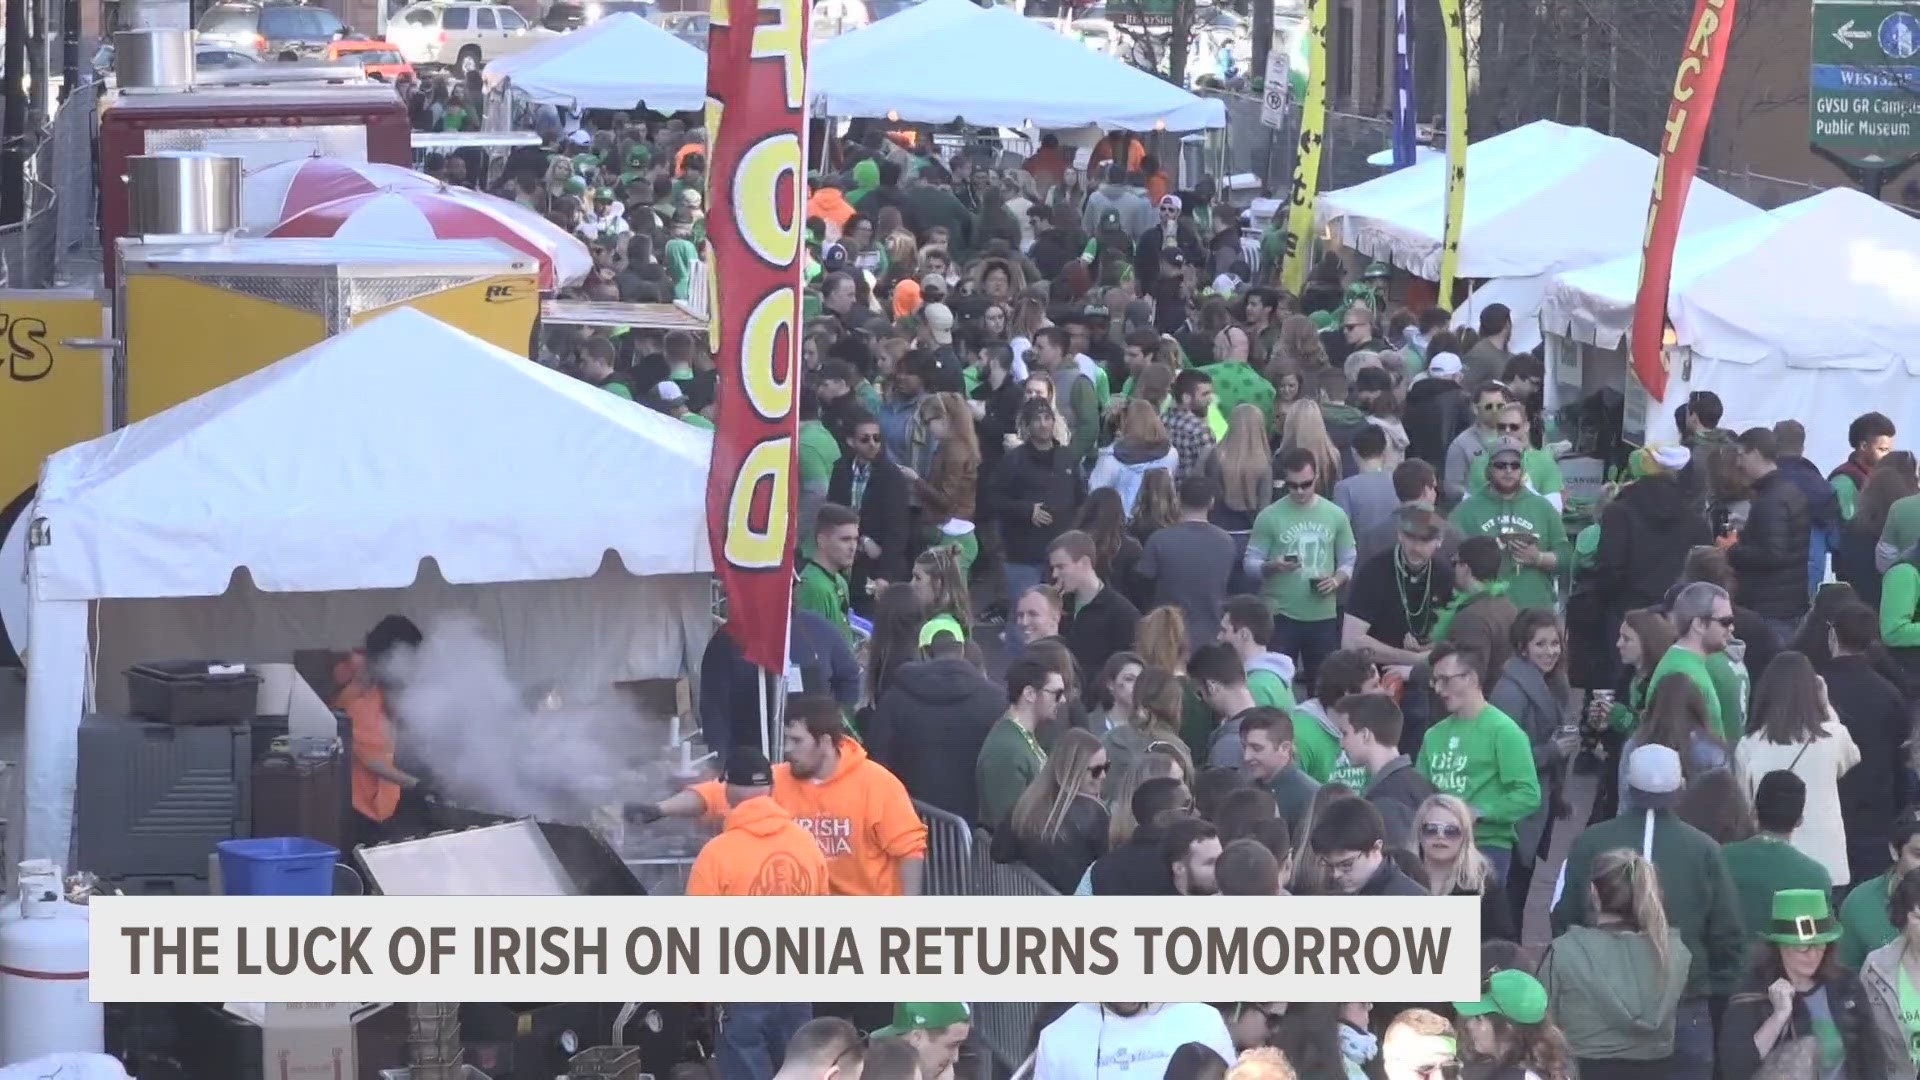 Irish on Ionia is Saturday from 10 a.m. to 9 p.m. Tickets are still available.